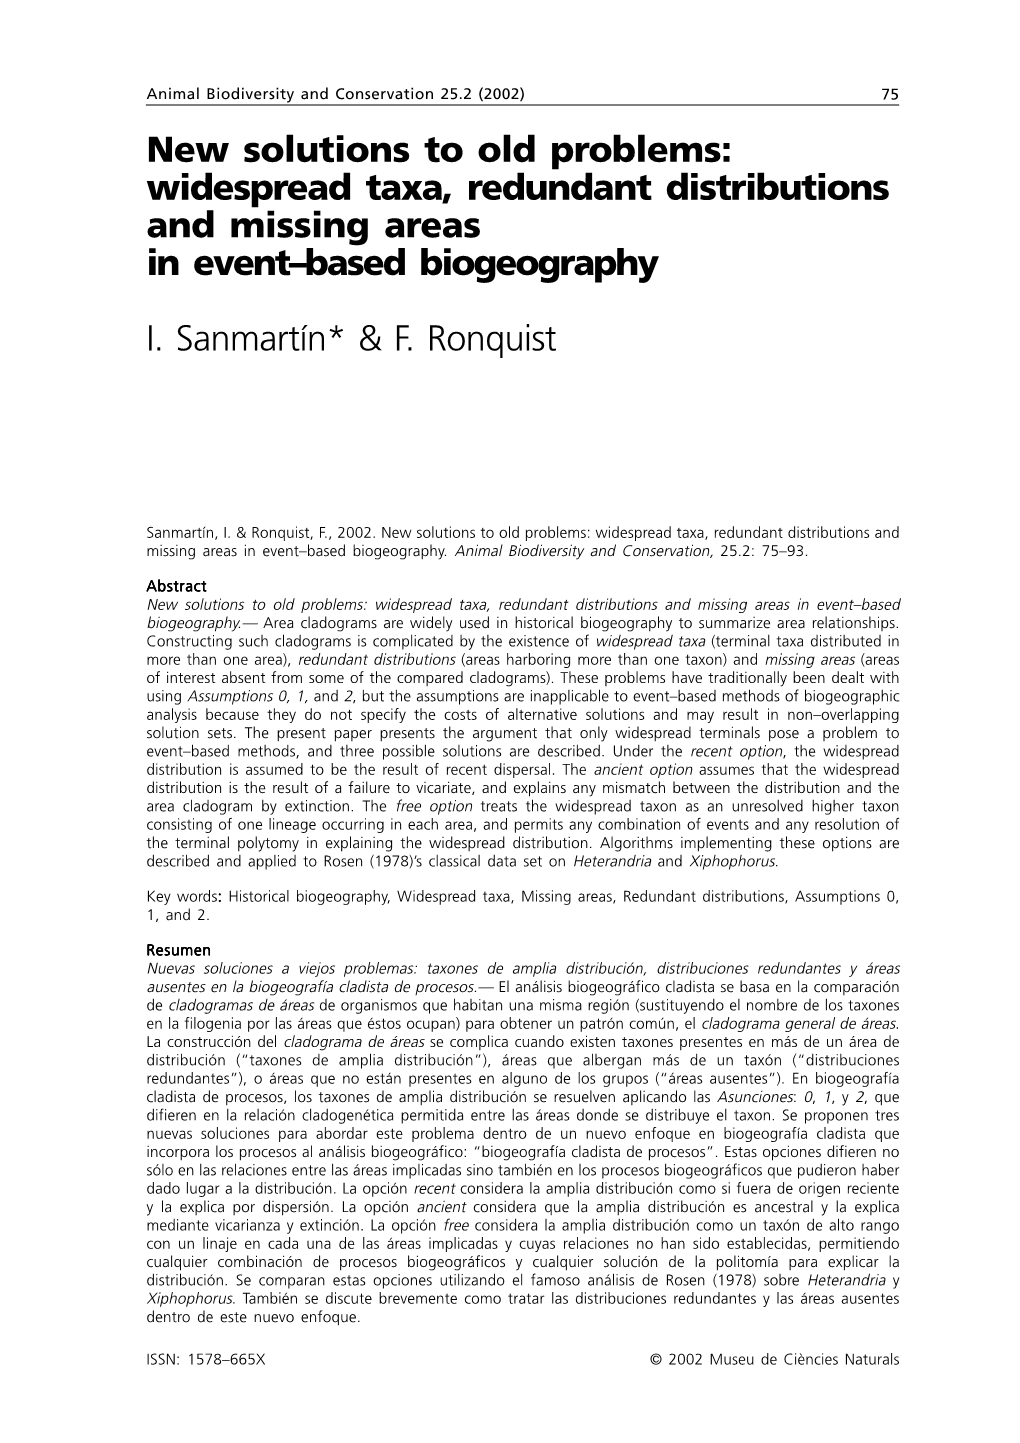 Widespread Taxa, Redundant Distributions and Missing Areas in Event–Based Biogeography